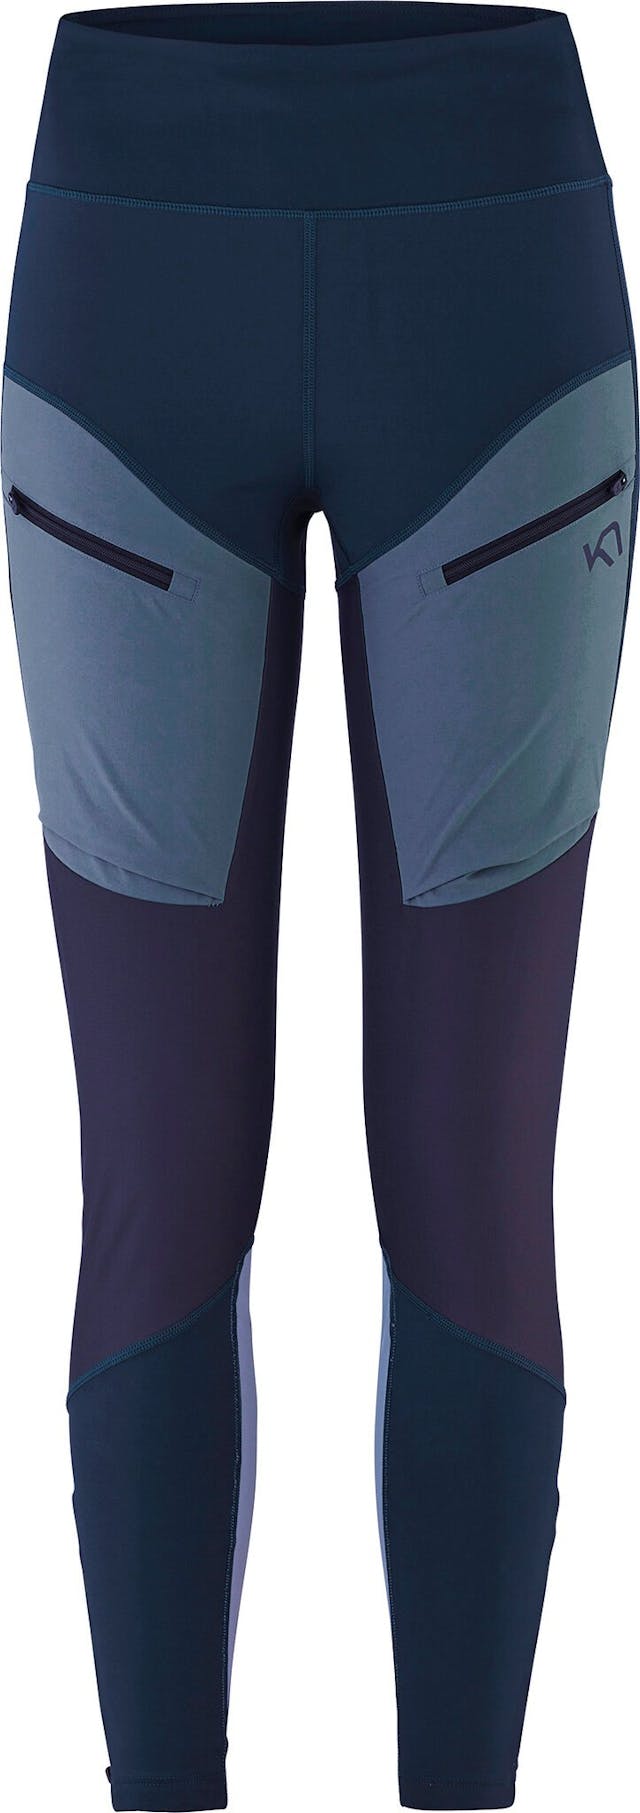 Product image for Ane Hiking Tights - Women's